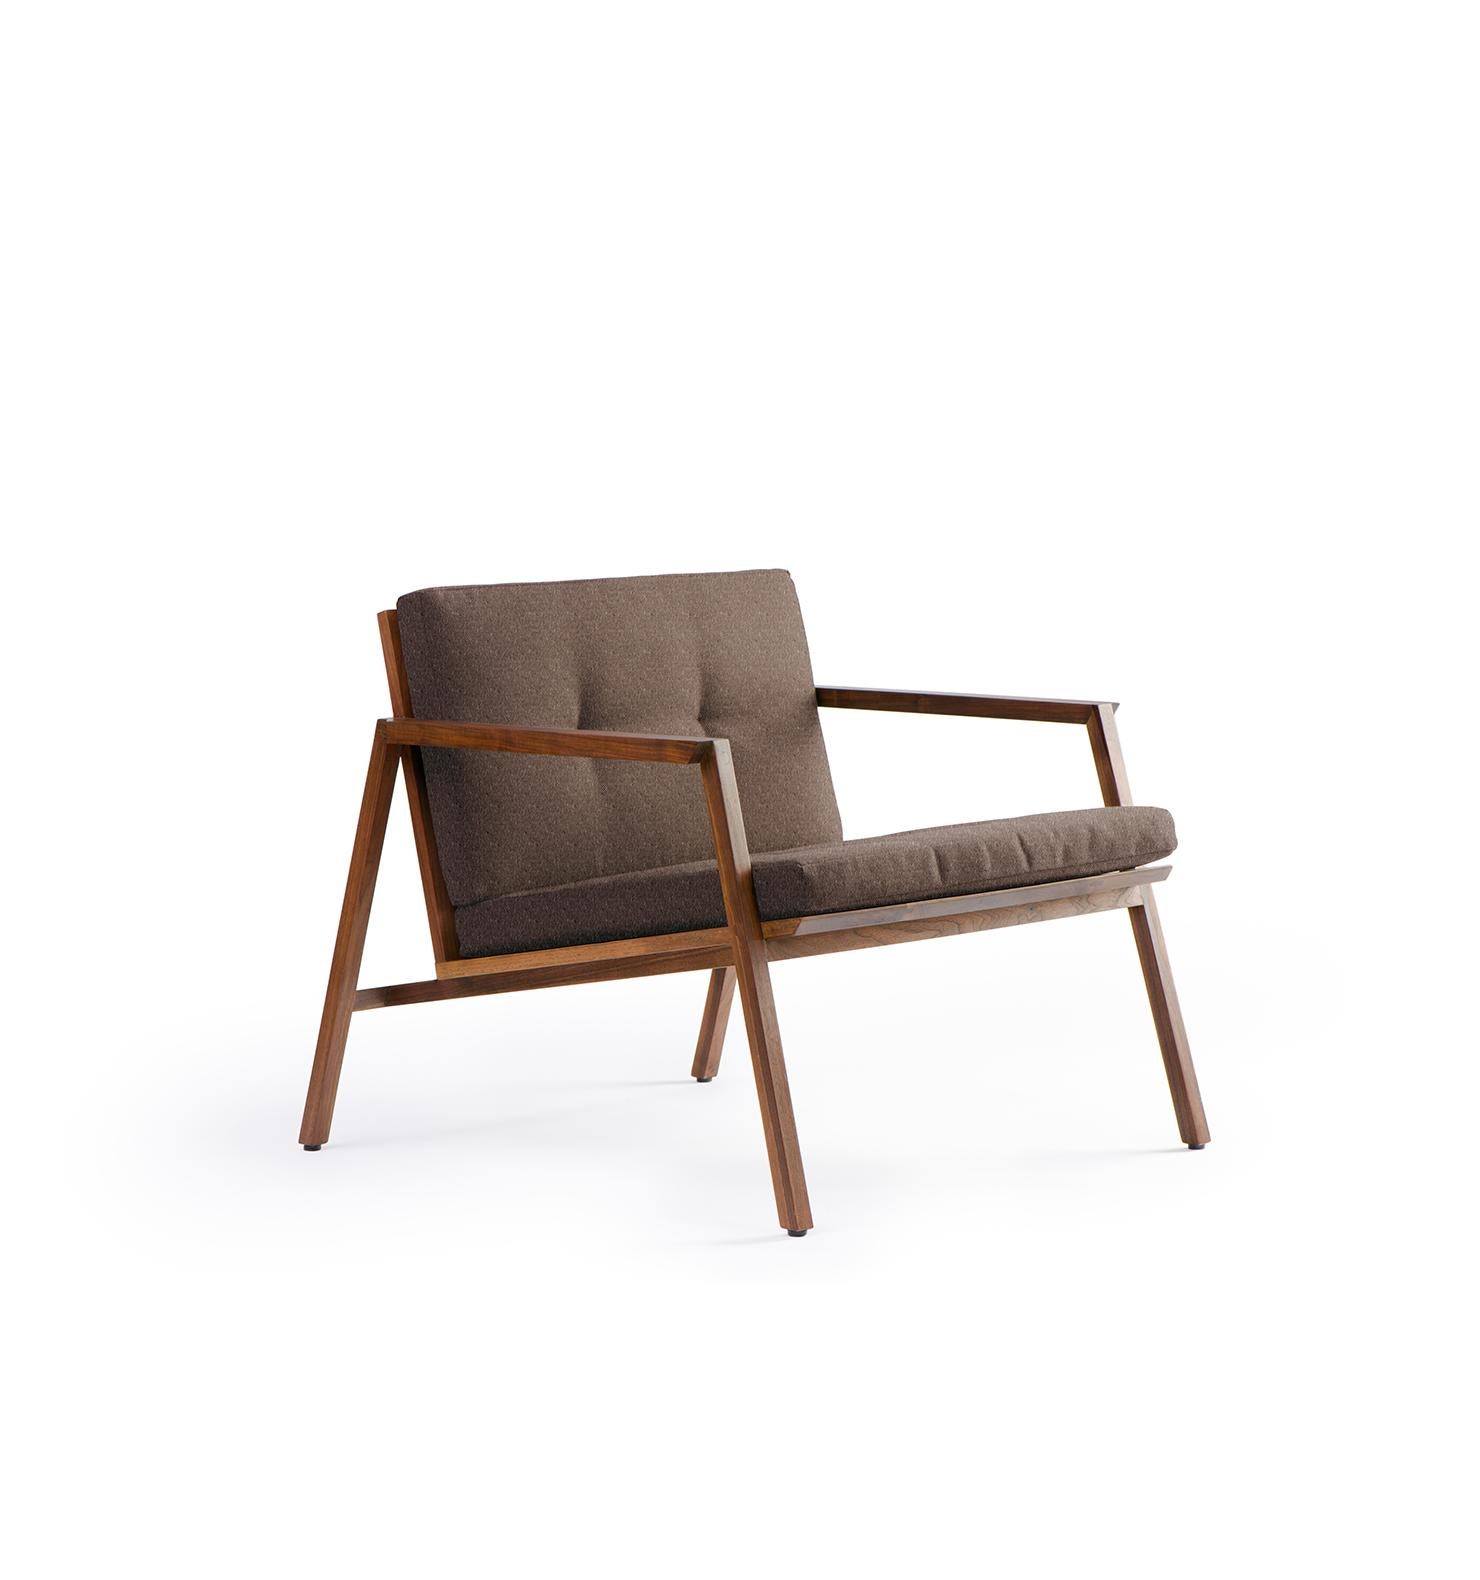 Tumbona Dedo, Mexican Contemporary Lounge Chair by Emiliano Molina for CUCHARA For Sale 7